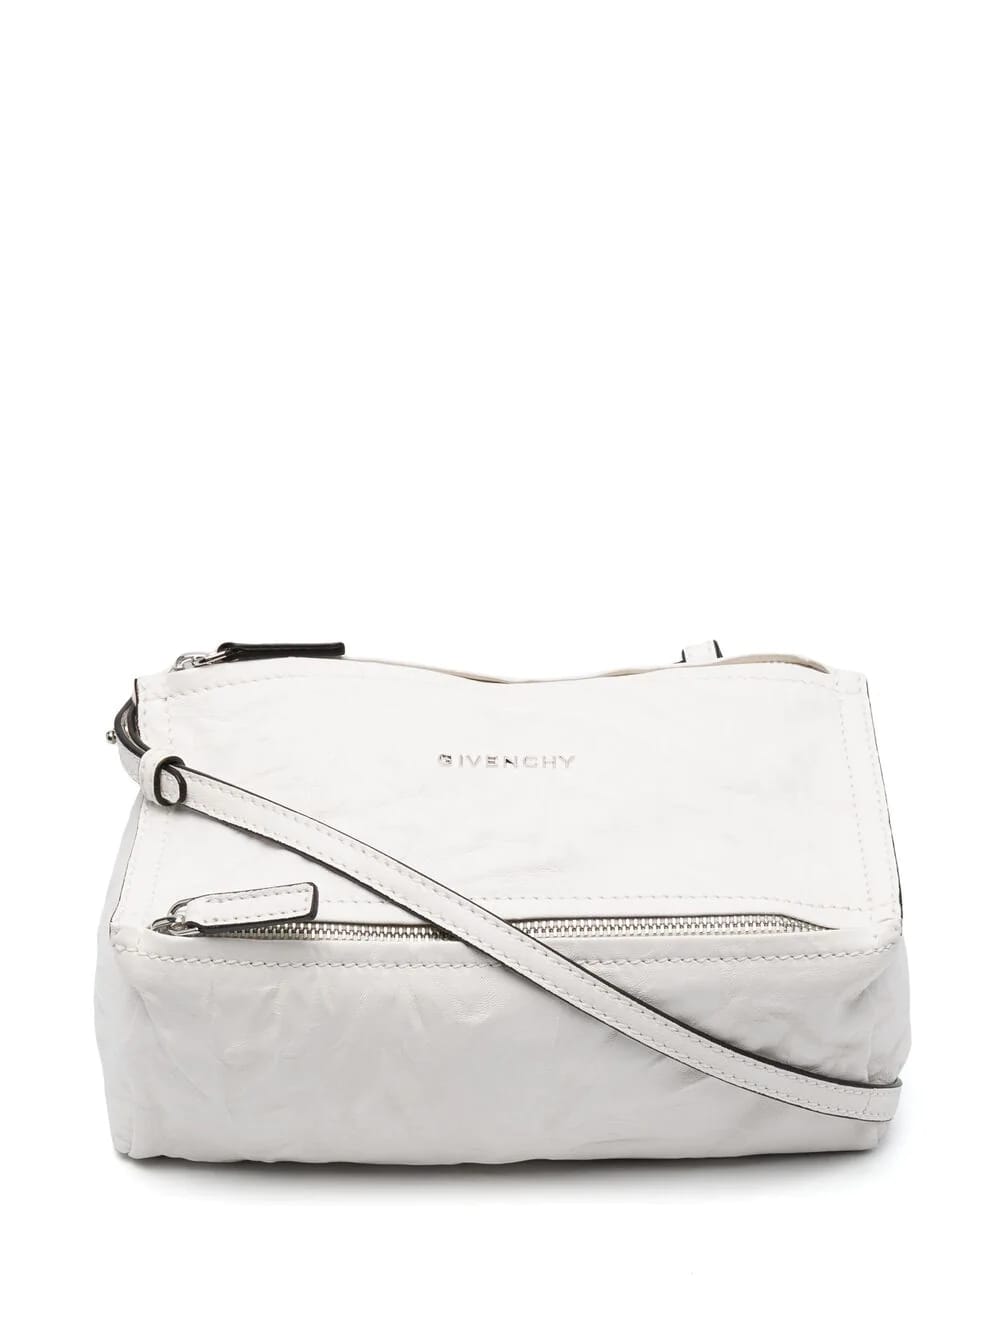 GIVENCHY WHITE MINI PANDORA BAG IN AGED LEATHER,BB05253004 105